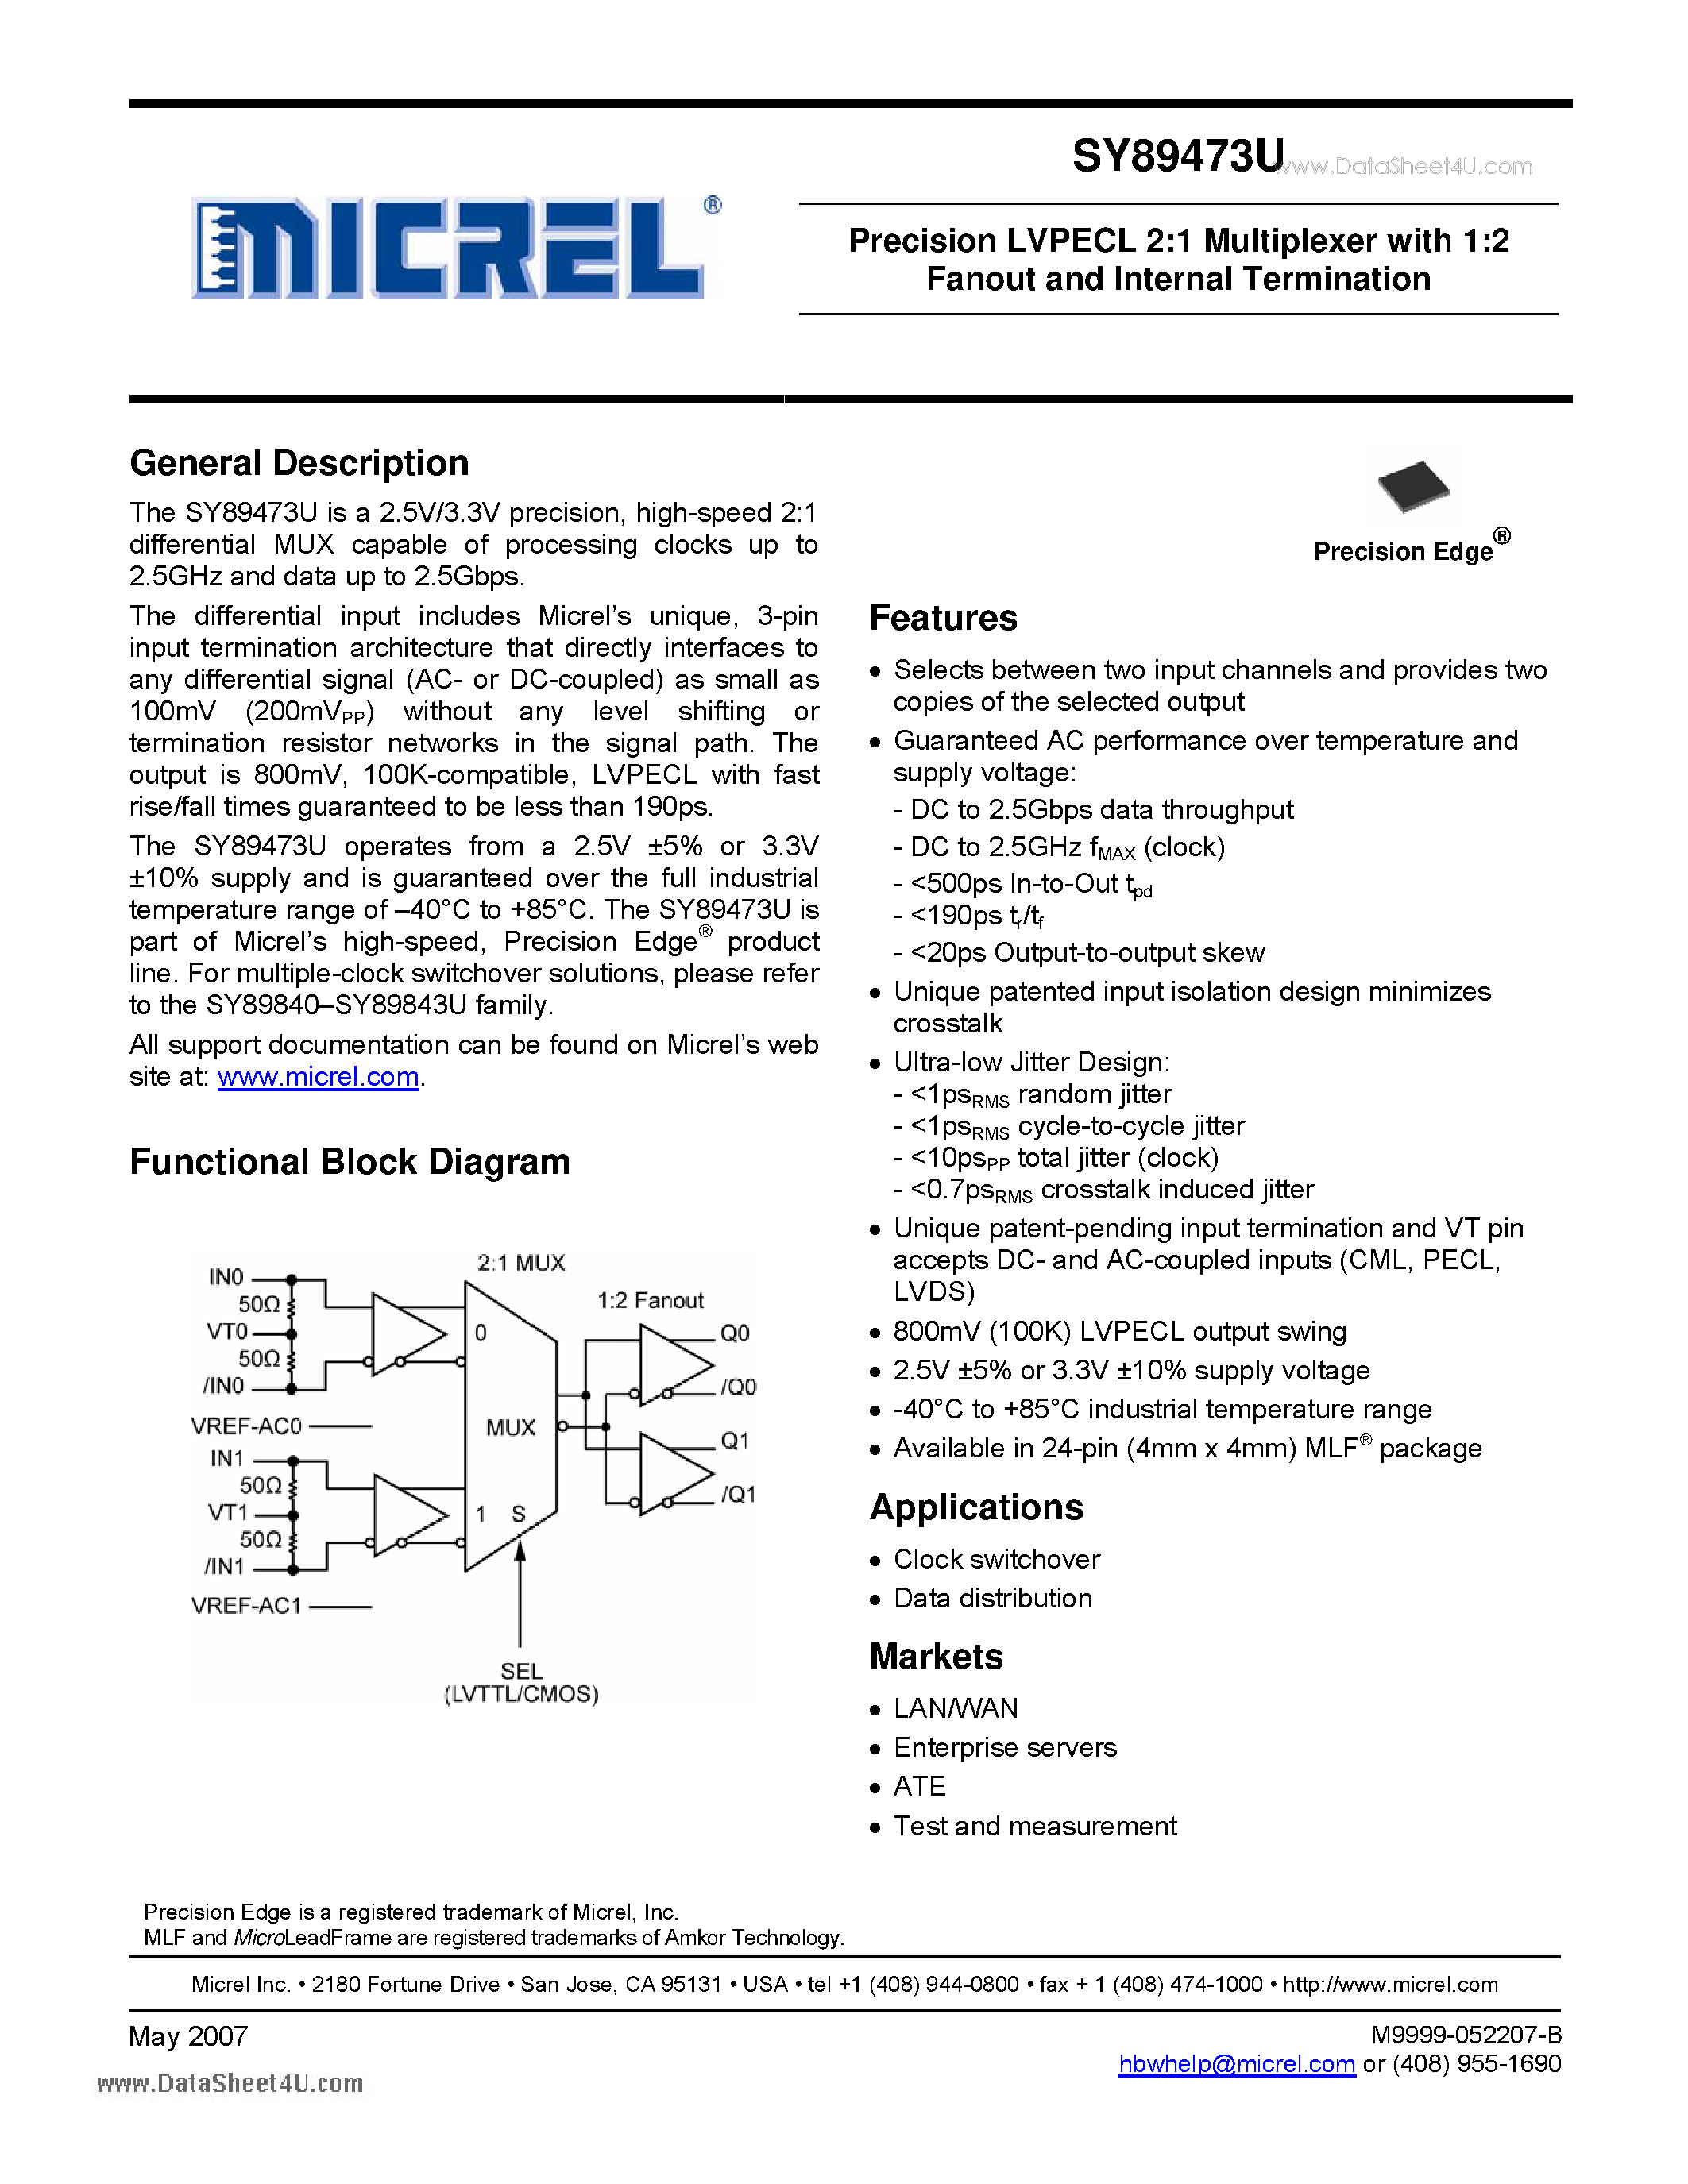 Datasheet SY89473U - Precision LVPECL 2:1 Multiplexer with 1:2 Fanout and Internal Termination page 1